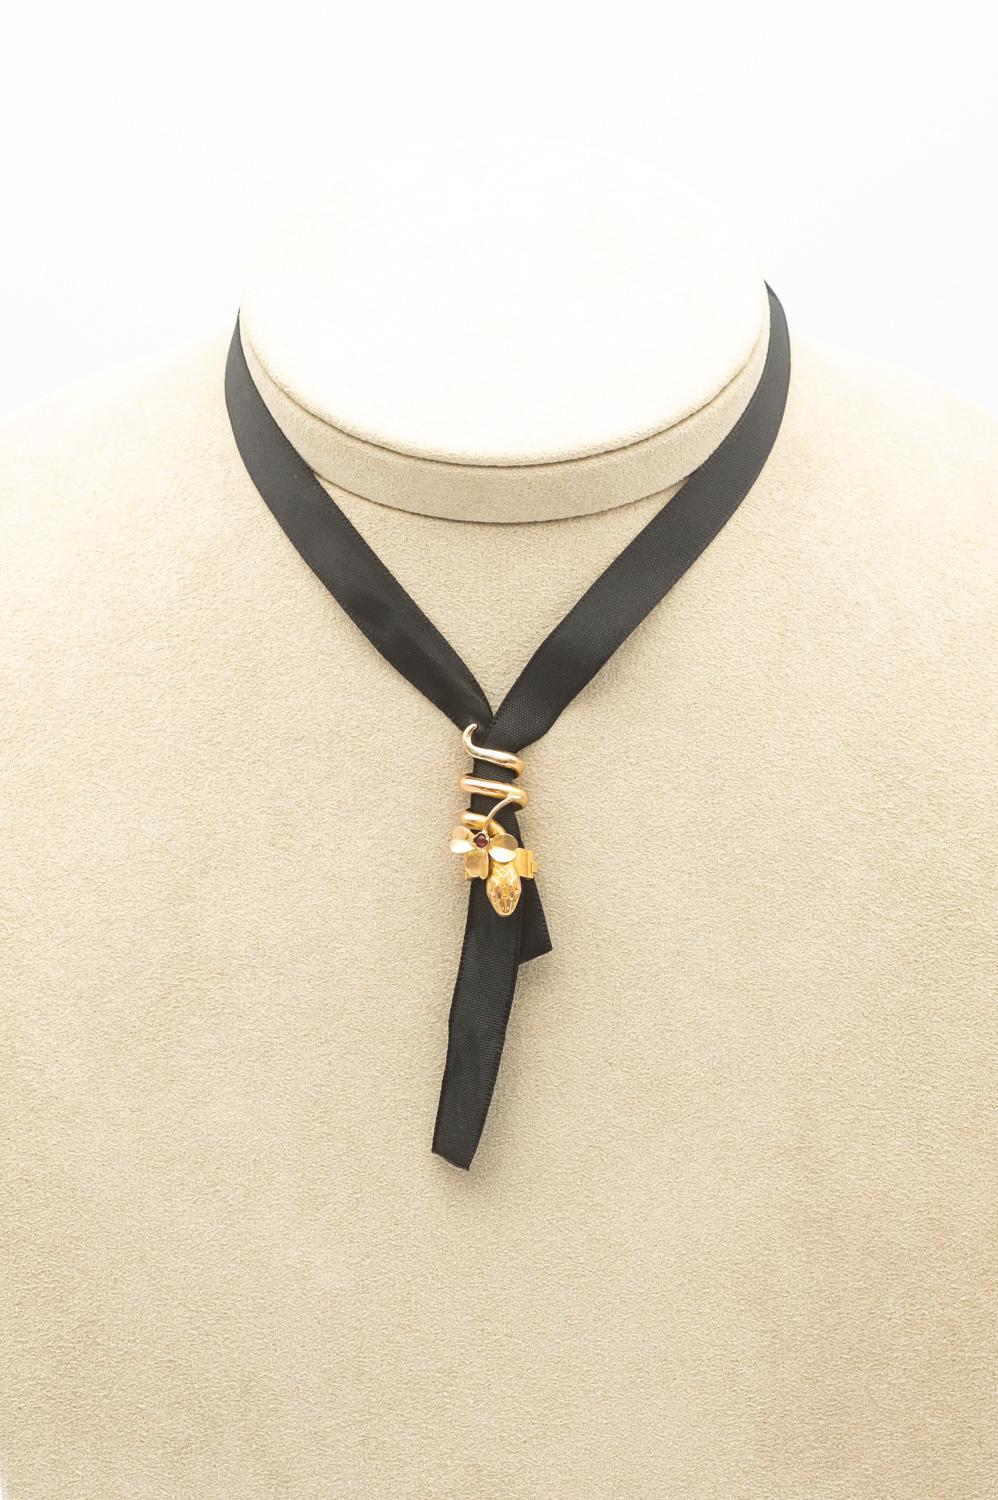 Discover this magnificent antique tie in 18-carat yellow gold, a jewel of rare elegance and timeless value. This tie features snake clip ribbons in 18 carat yellow gold, offering exceptional versatility as they can be worn as a choker pendant.

At